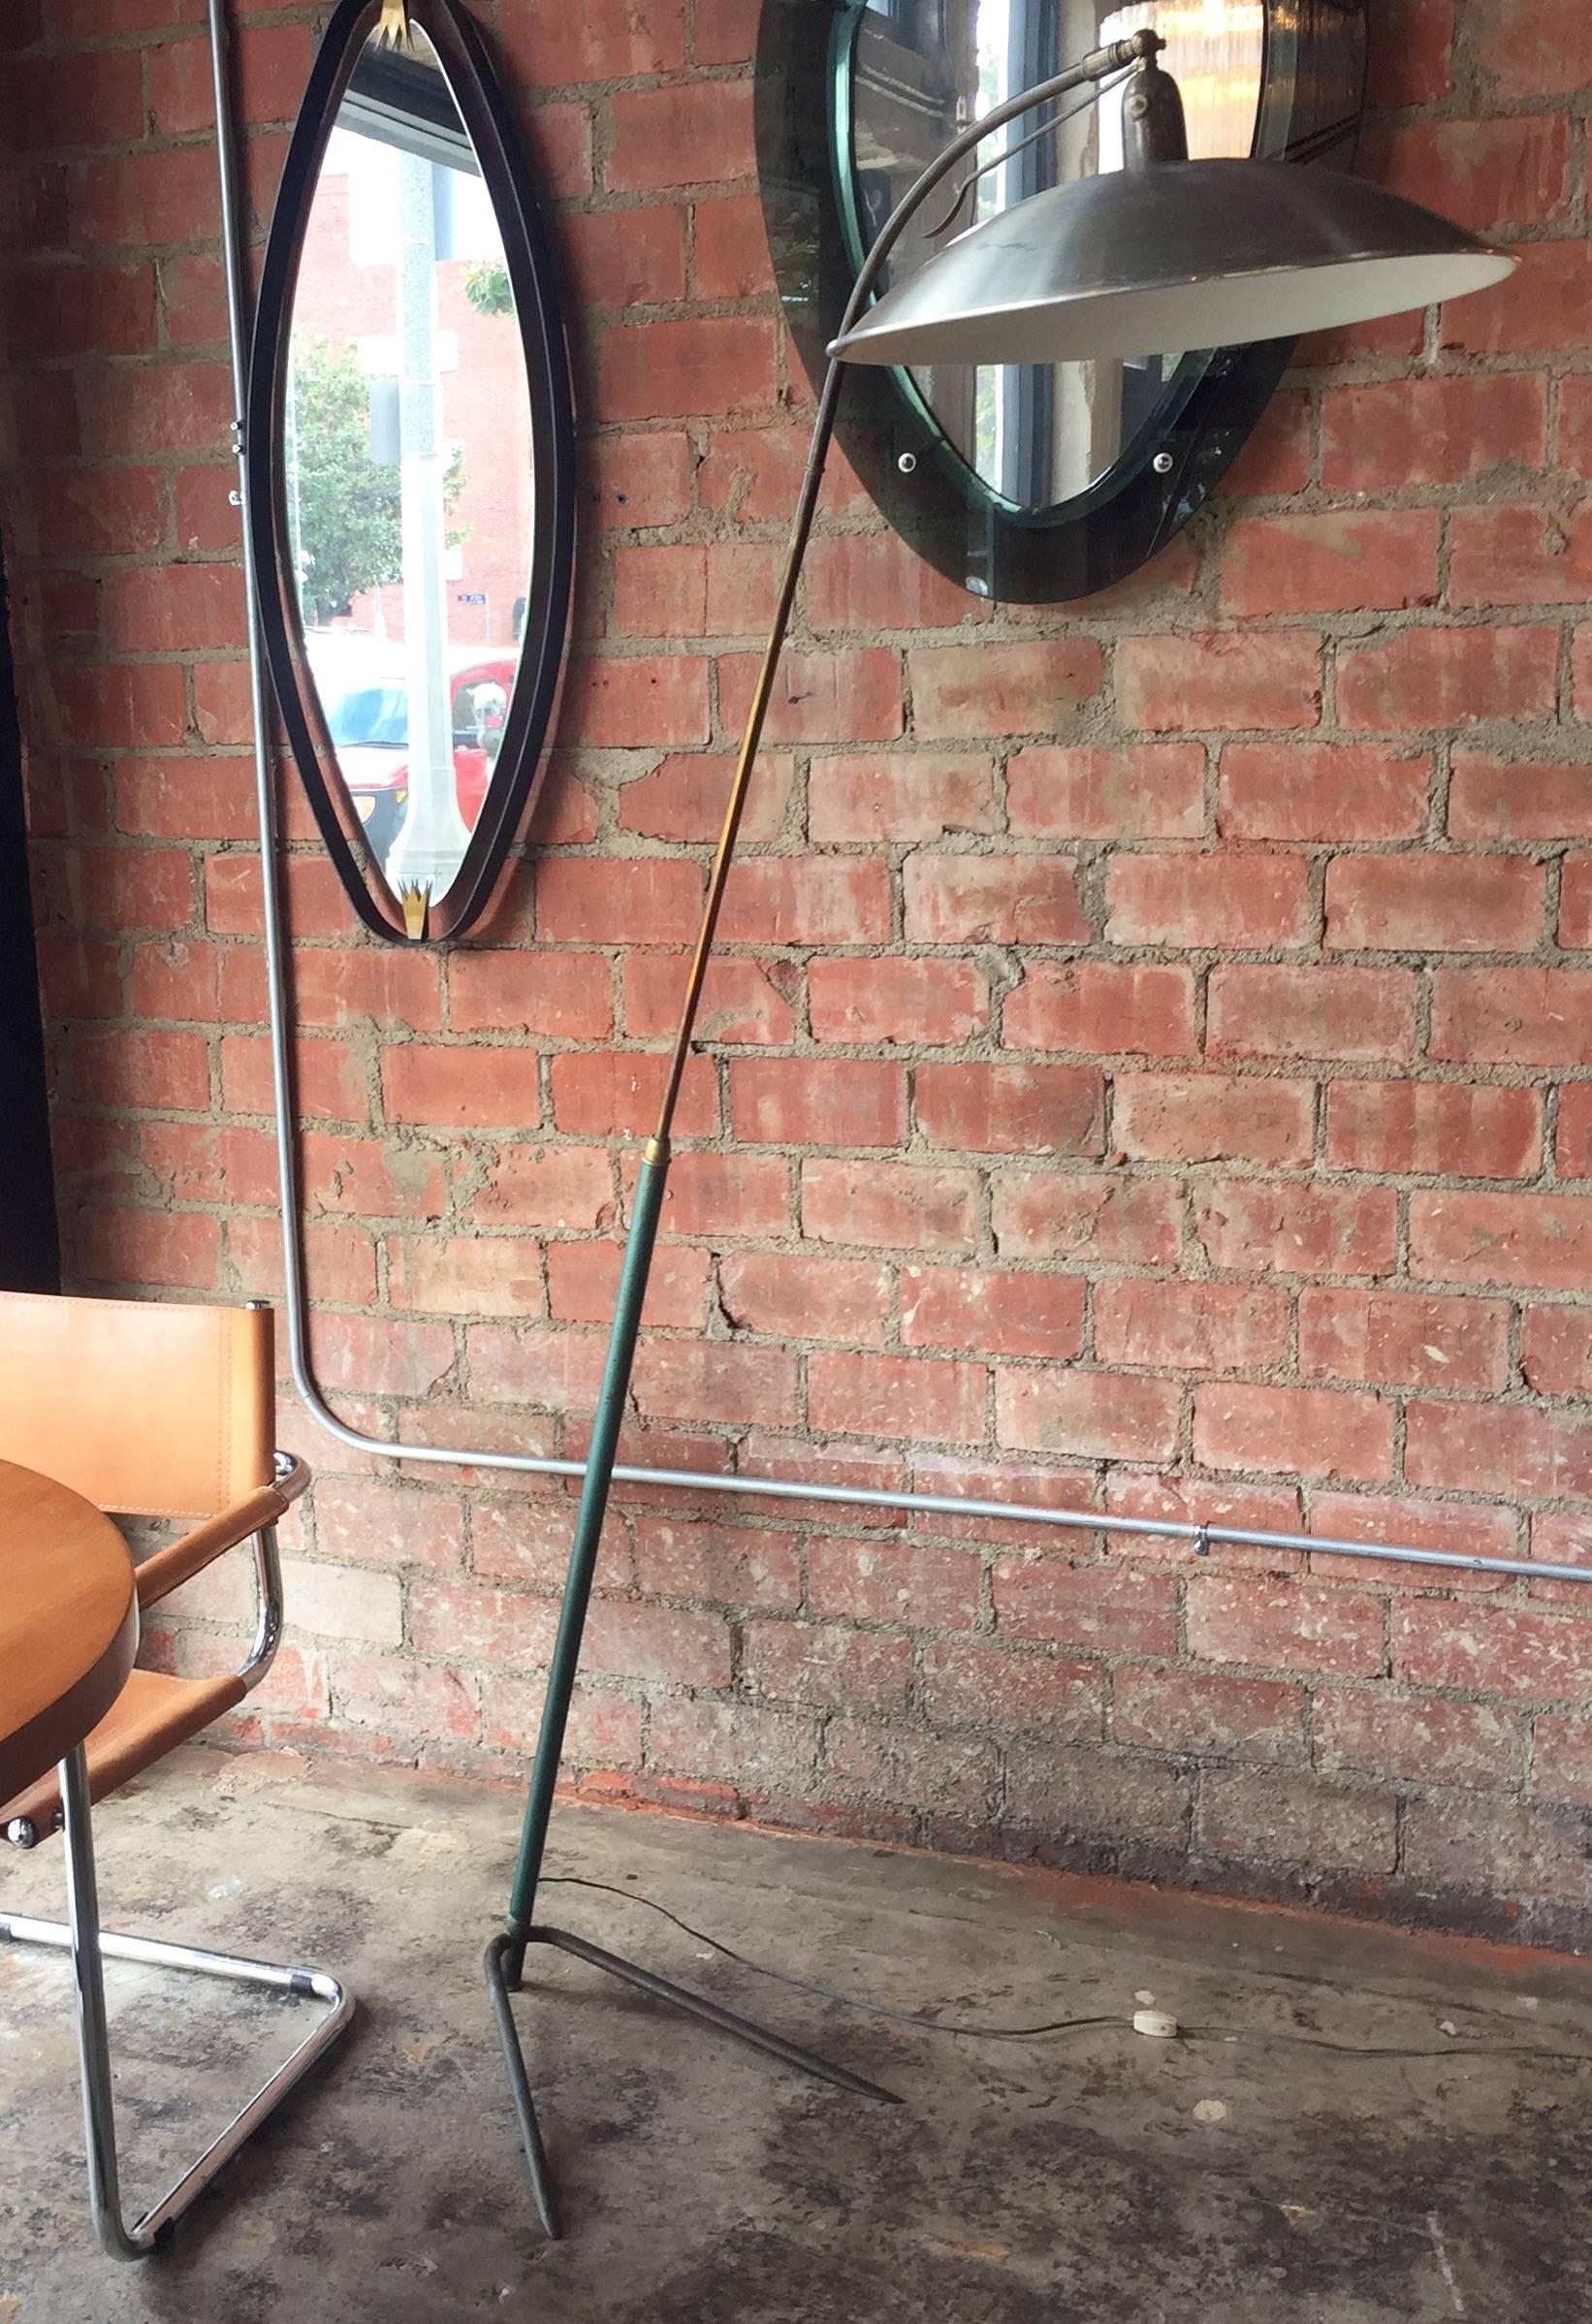 Italian vintage one-arm floor lamp attributed to Gino Sarfatti, 1950s
Elegant, subtle and essential shape.
Equipped with a large metal head, adjustable, this light provides a beautiful and bright light. 
The shade is adjustable as well, so this